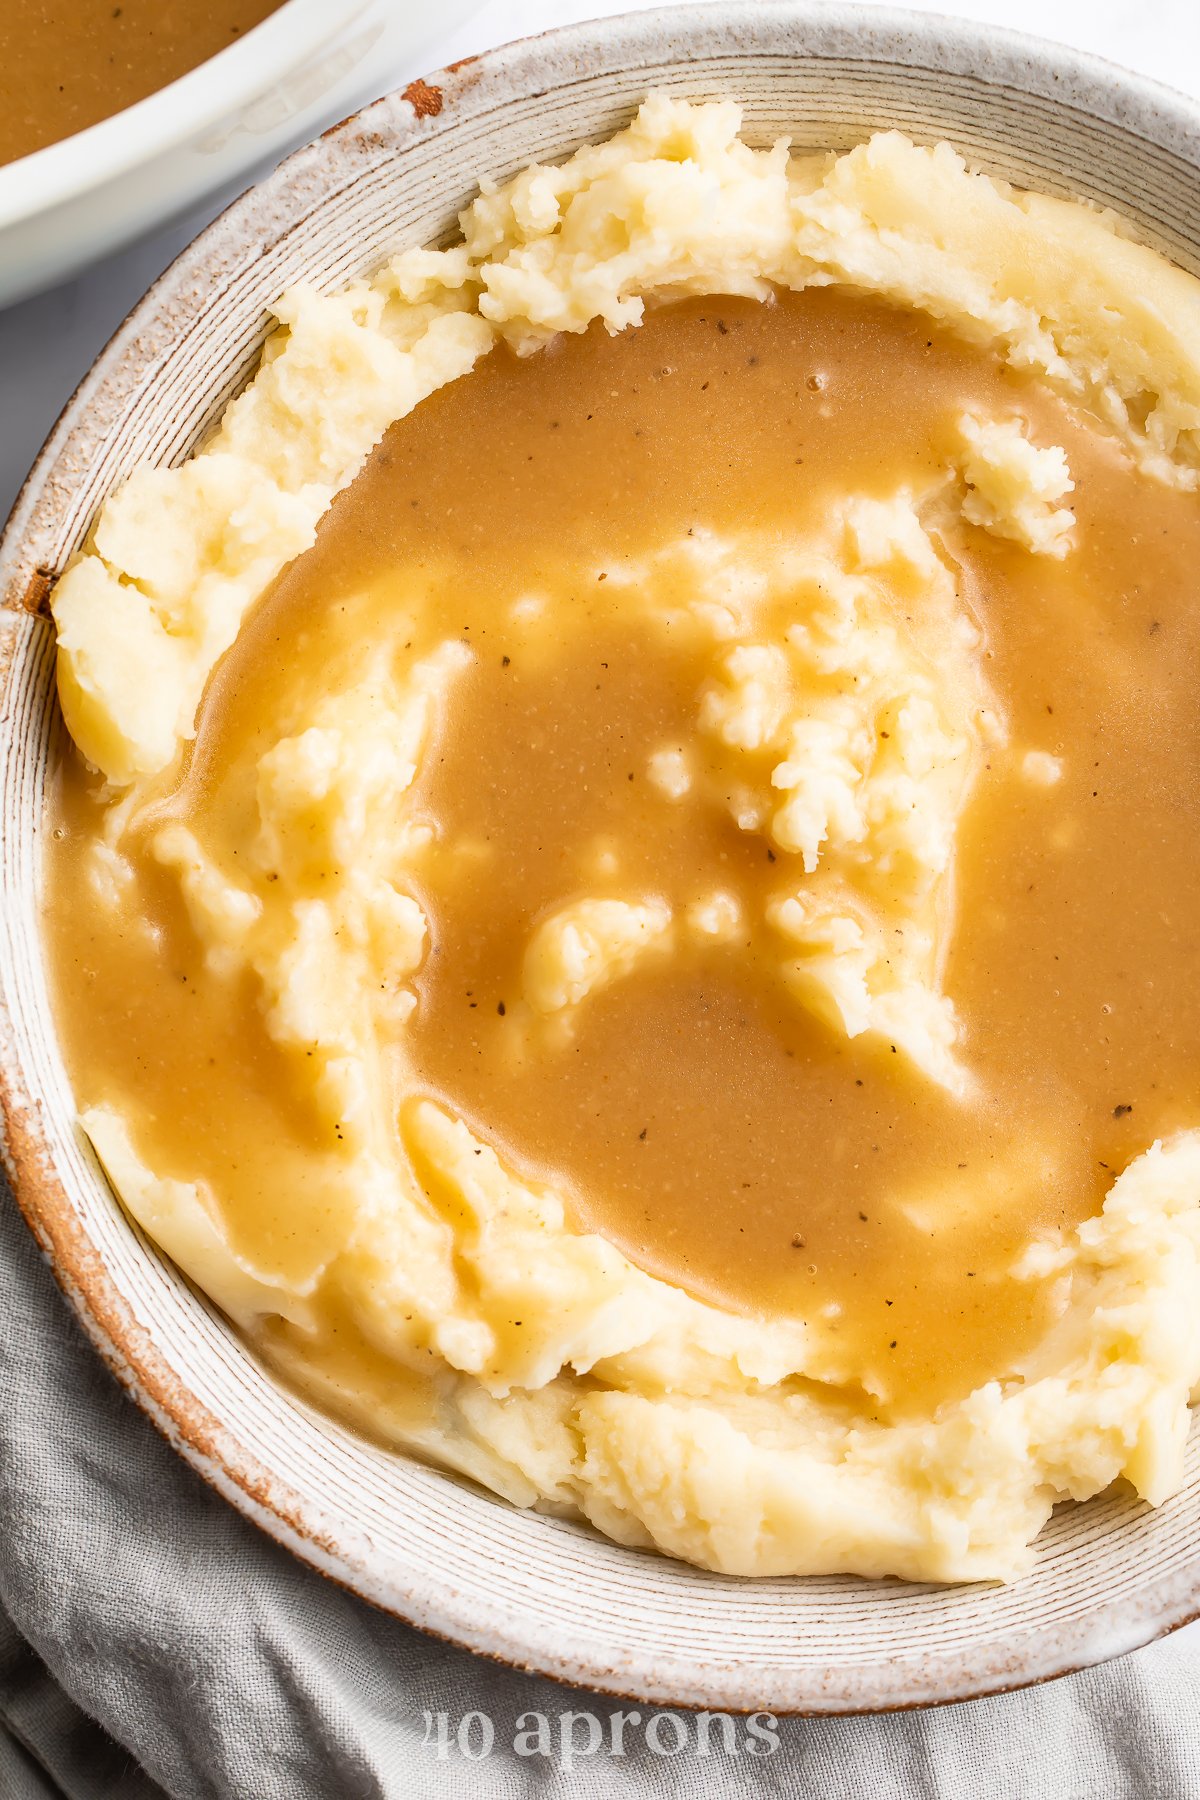 An overhead view of a bowl of fluffy mashed potatoes topped with a beautifully golden gluten-free gravy.